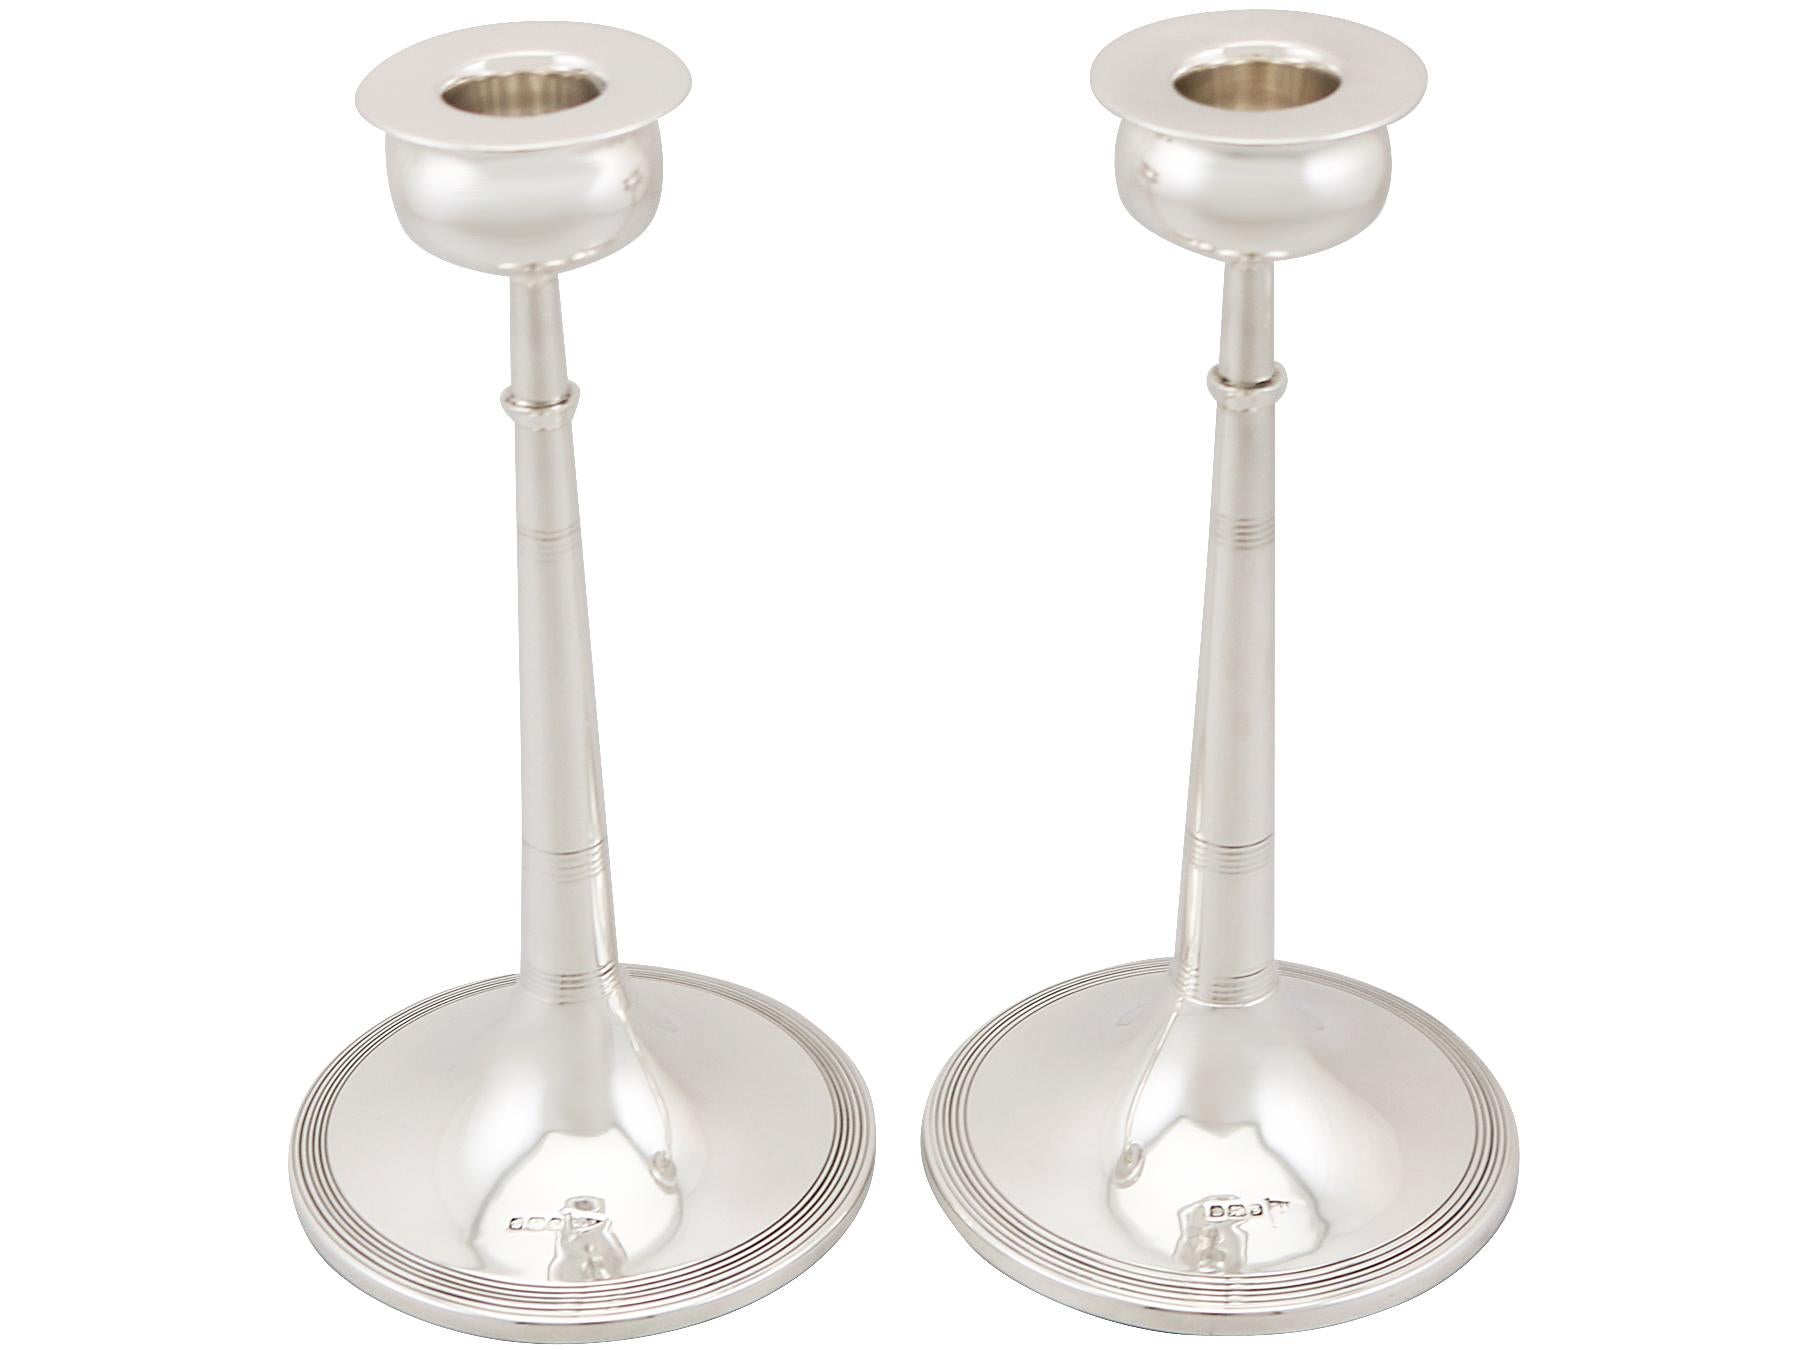 An exceptional, fine and impressive pair of antique George V English sterling silver candlesticks in the Art Nouveau style, an addition to our ornamental silverware collection.

These exceptional antique George V English sterling silver